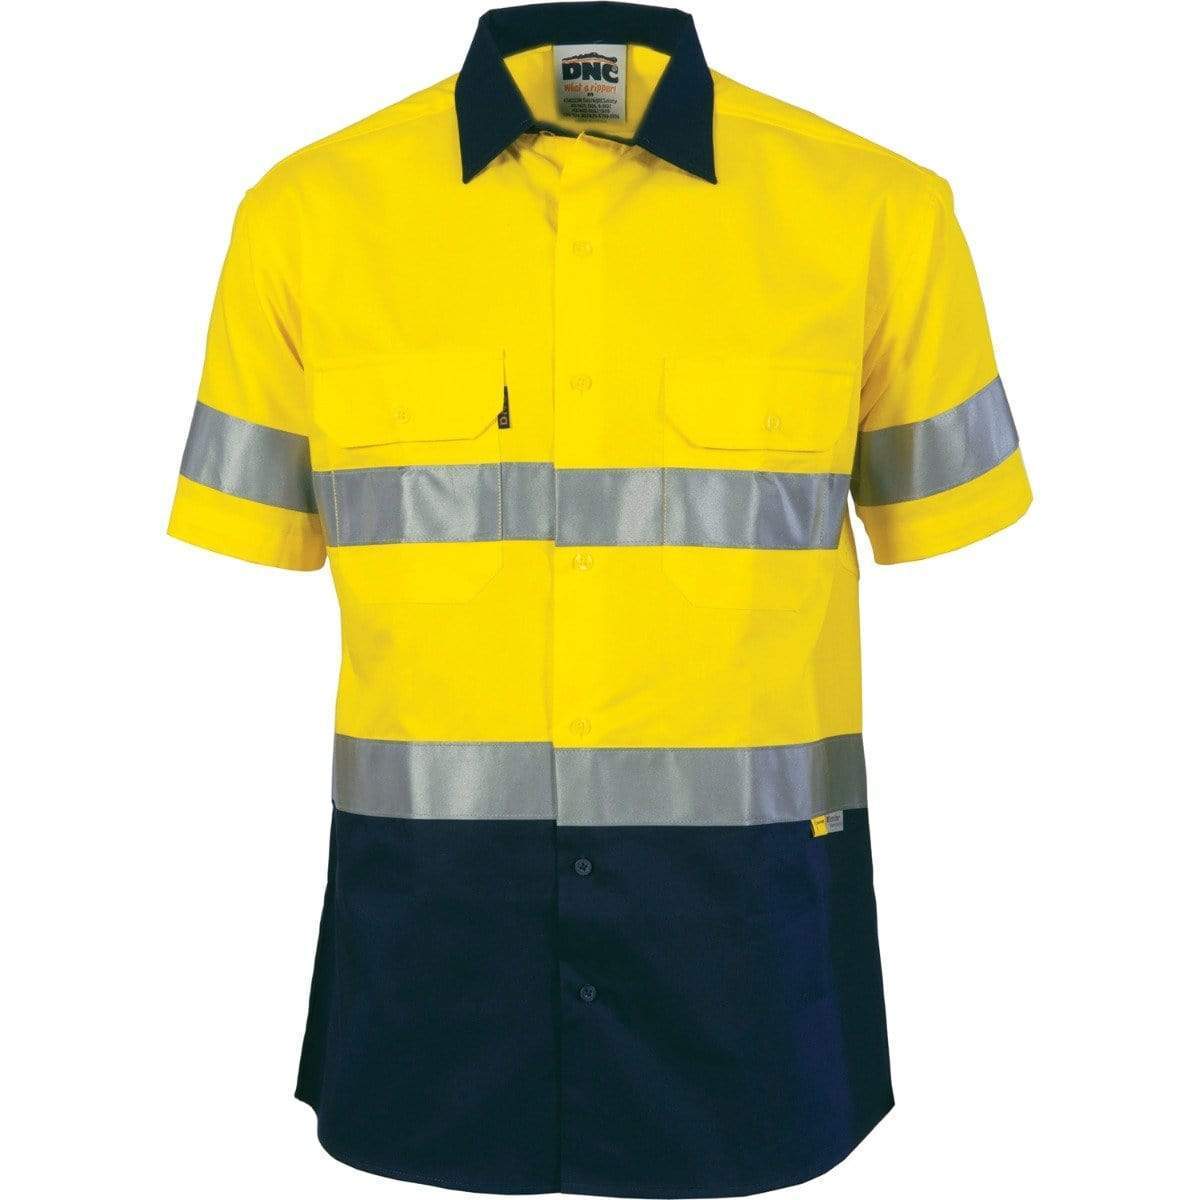 DNC Workwear Work Wear Yellow/Navy / S DNC WORKWEAR Hi-Vis Two-Tone Short Sleeve Drill Shirt with 3M 8906 R/Tape 3833